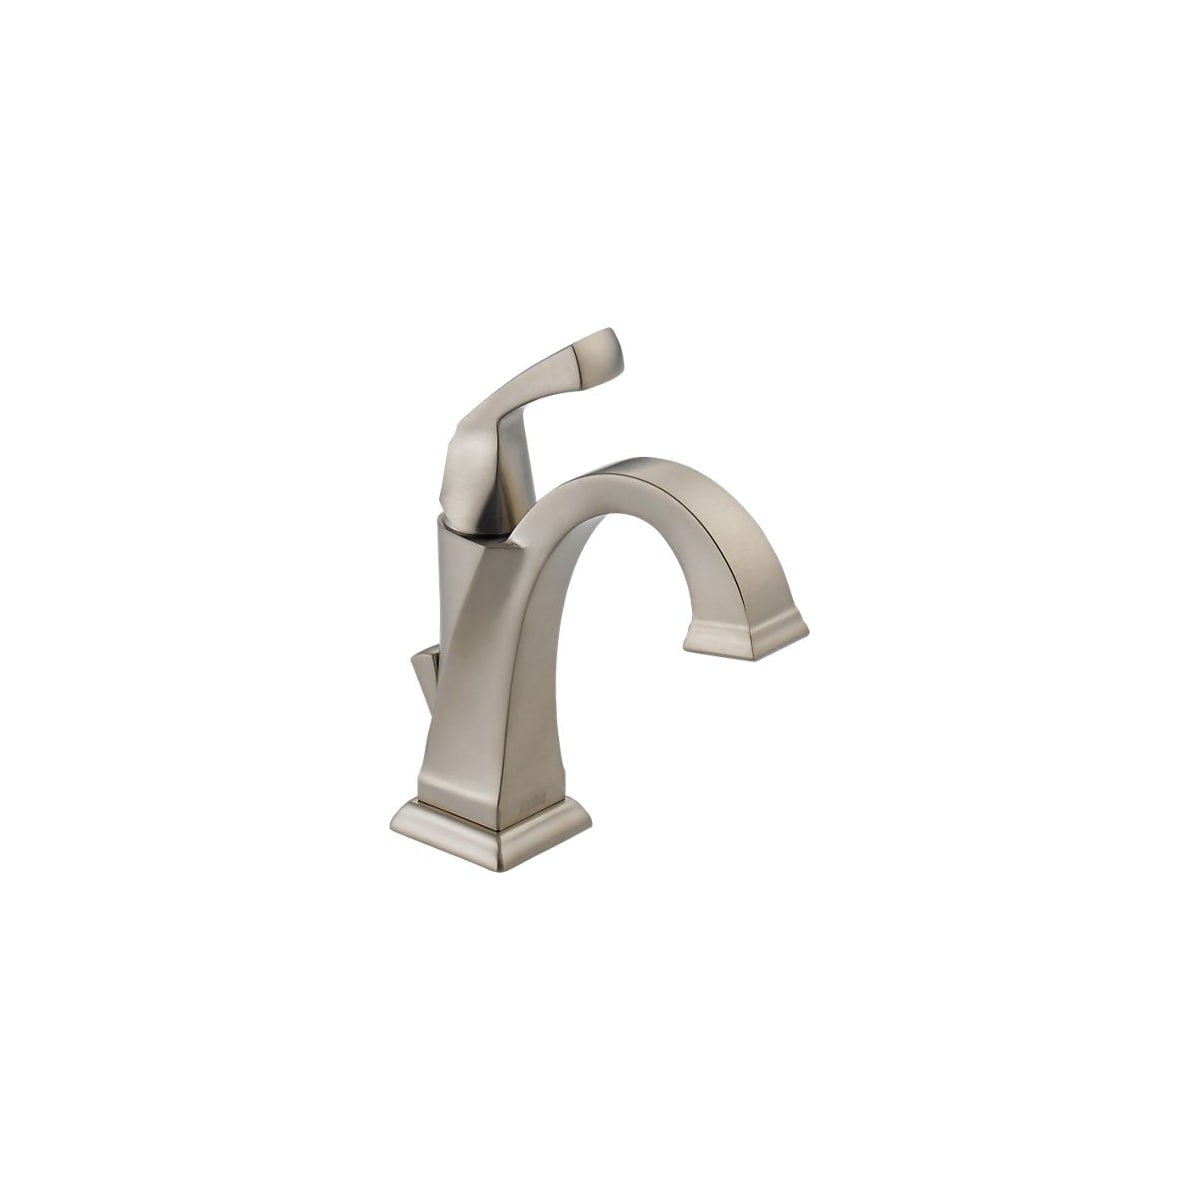 Delta 551 Sp Dst Spotshield Stainless Dryden Single Hole Bathroom Faucet With Diamond Seal Technology Includes Pop Up Drain Assembly Faucetdirect Com